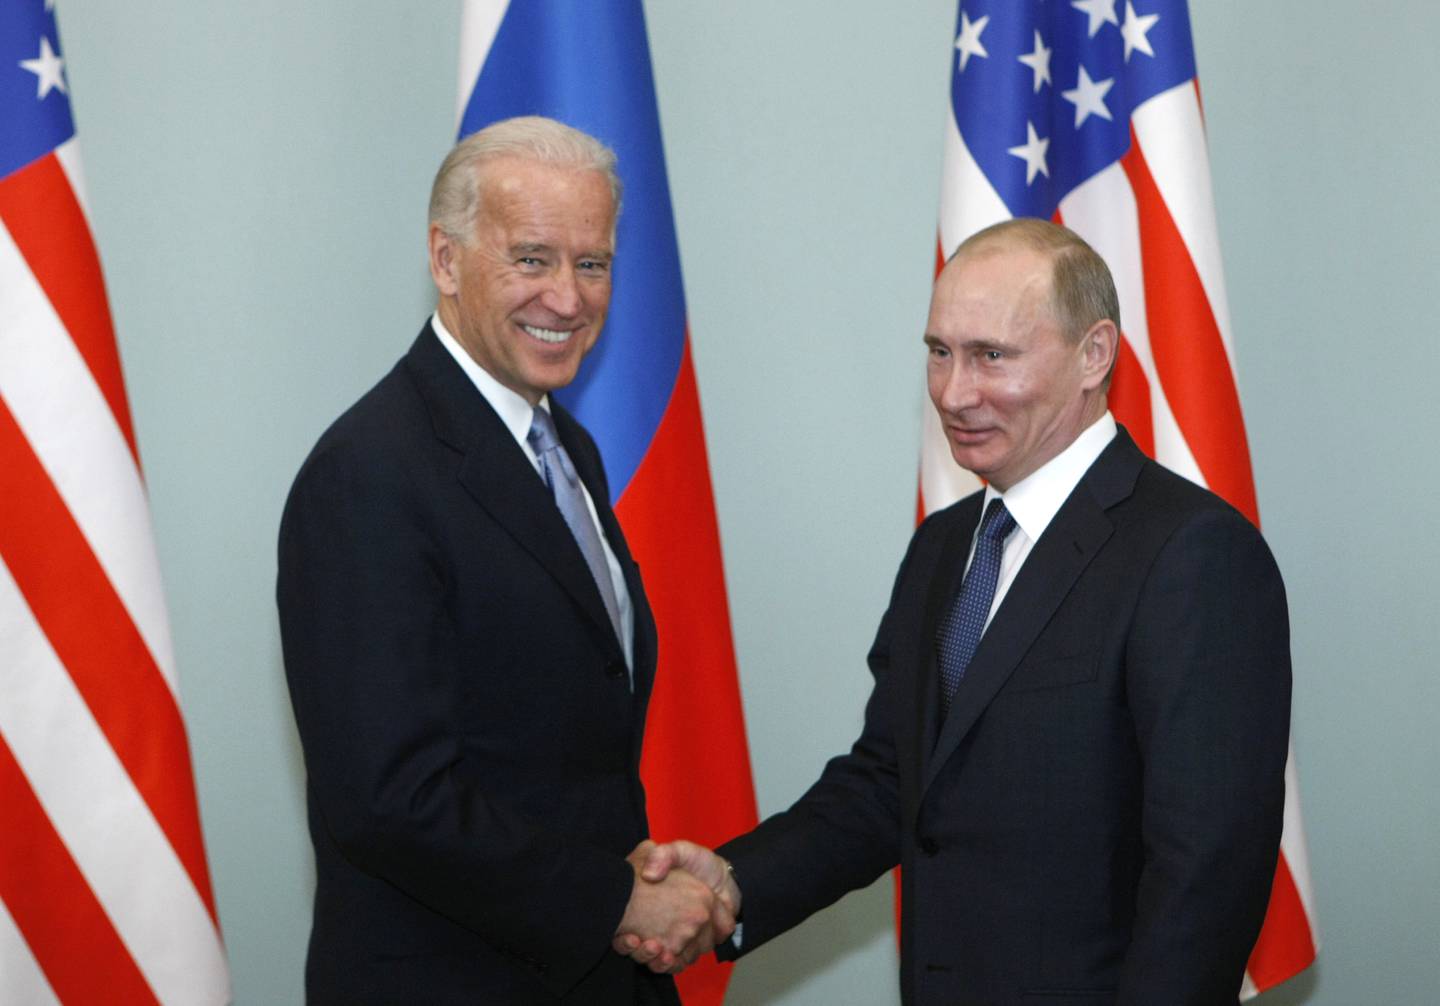 FILE - In this March 10, 2011, file photo, Vice President of the United States Joe Biden, left, shakes hands with Russian Prime Minister Vladimir Putin in Moscow, Russia. Putin wont congratulate President-elect Joe Biden until legal challenges to the U.S. election are resolved and the result is official, the Kremlin announced Monday, Nov. 9, 2020. (AP Photo/Alexander Zemlianichenko, File)